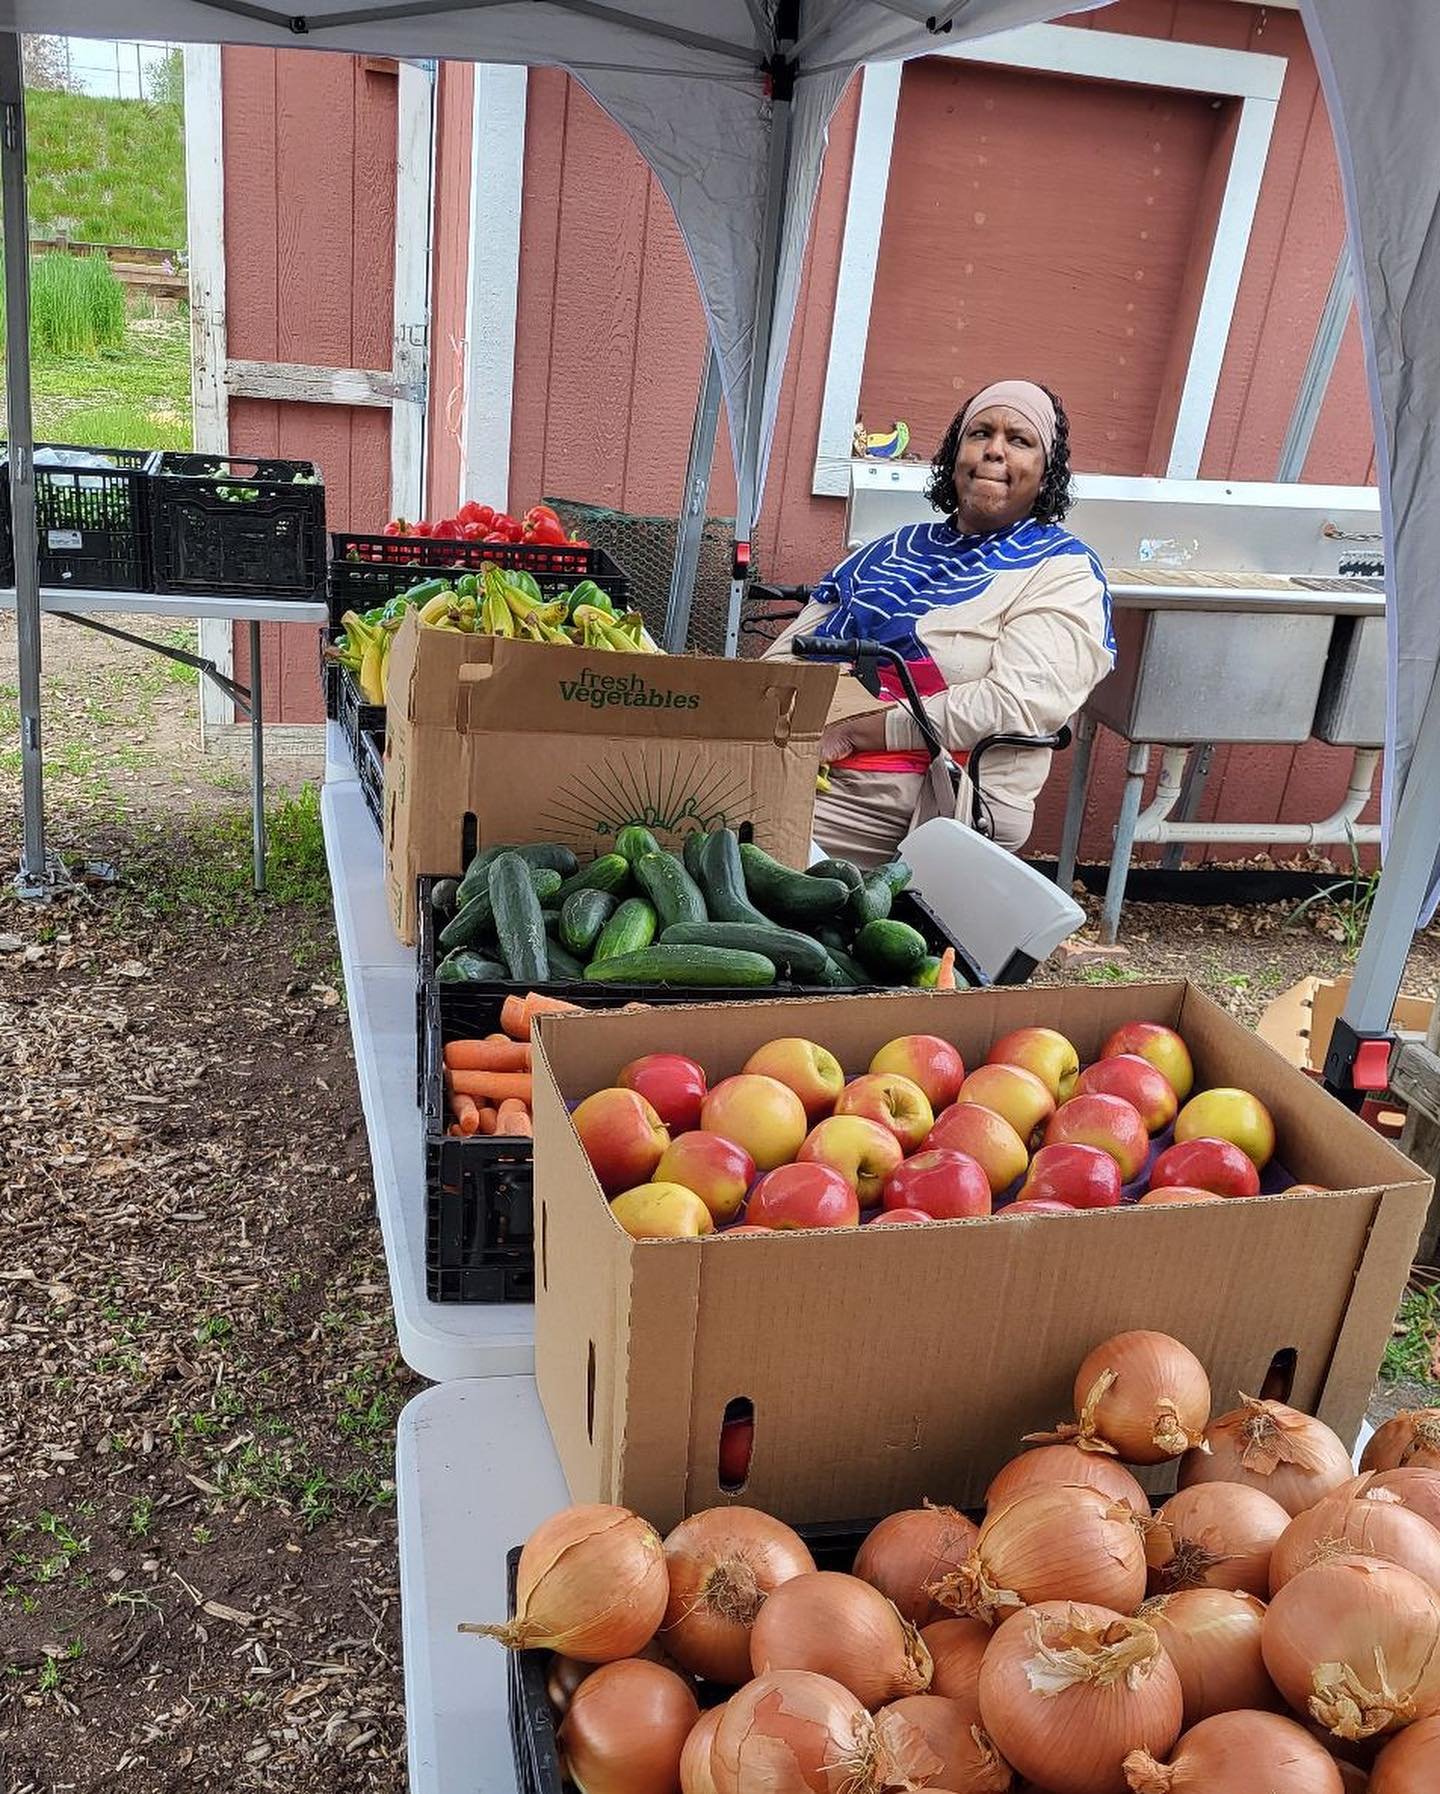 Andrea's first no-cost market at Mountair Park Community Farm was a big success!

We're so excited to host Andrea Loudd and Southwest Food Coalition to make food access possible for our neighbors, even when the fields are taking a rest year from prod